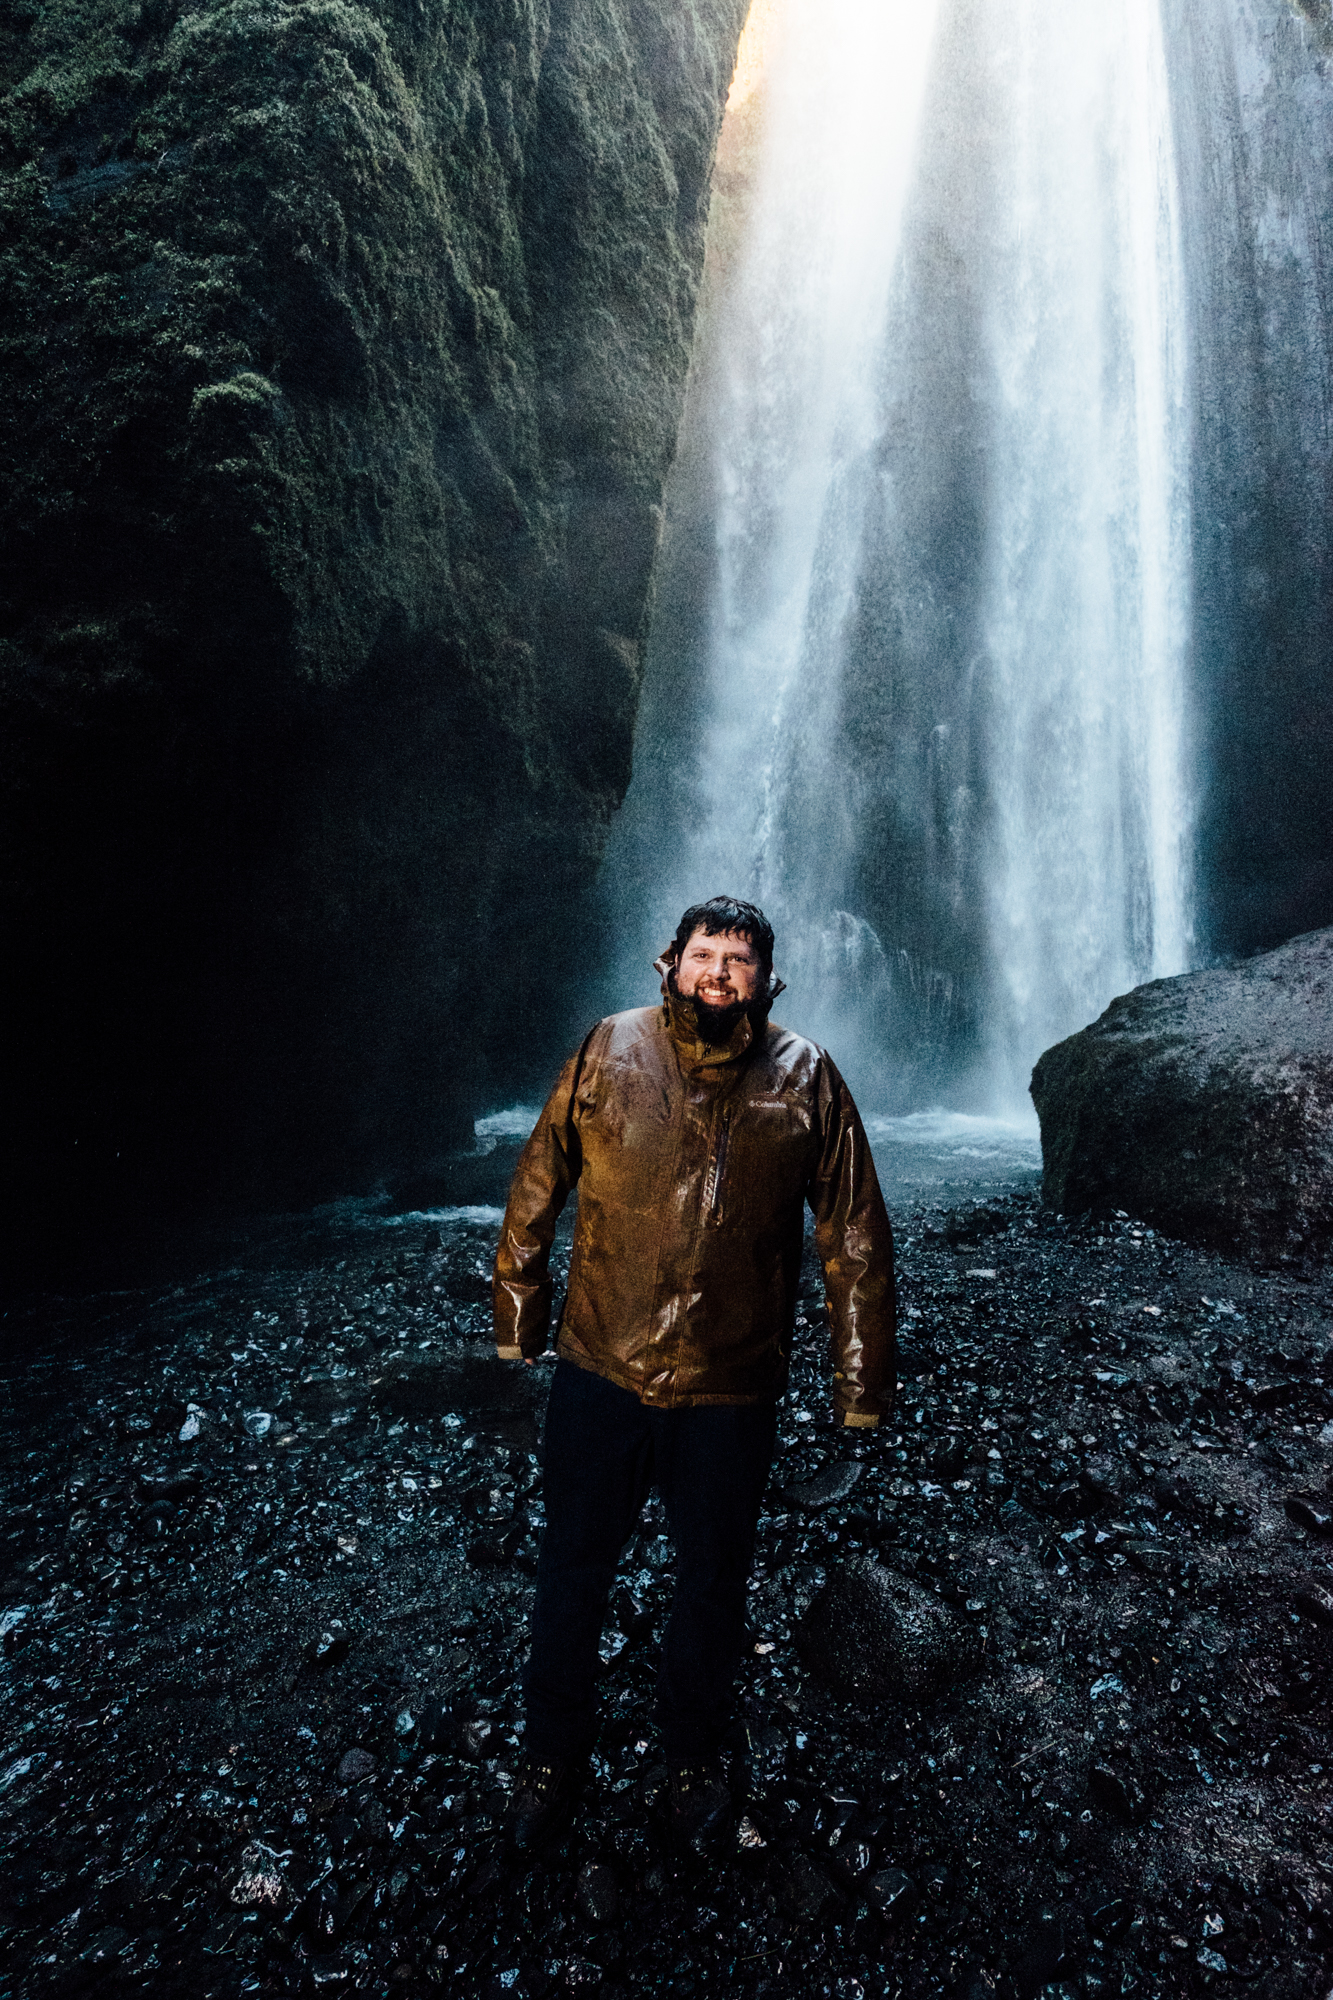  Jake posing in front of Gljufrabui! This was one of our favorite hidden gems in Iceland - this waterfall is tucked behind a rock face and not visible from the front. It’s an easy hike through a shallow stream to get into the clearing to view the wat